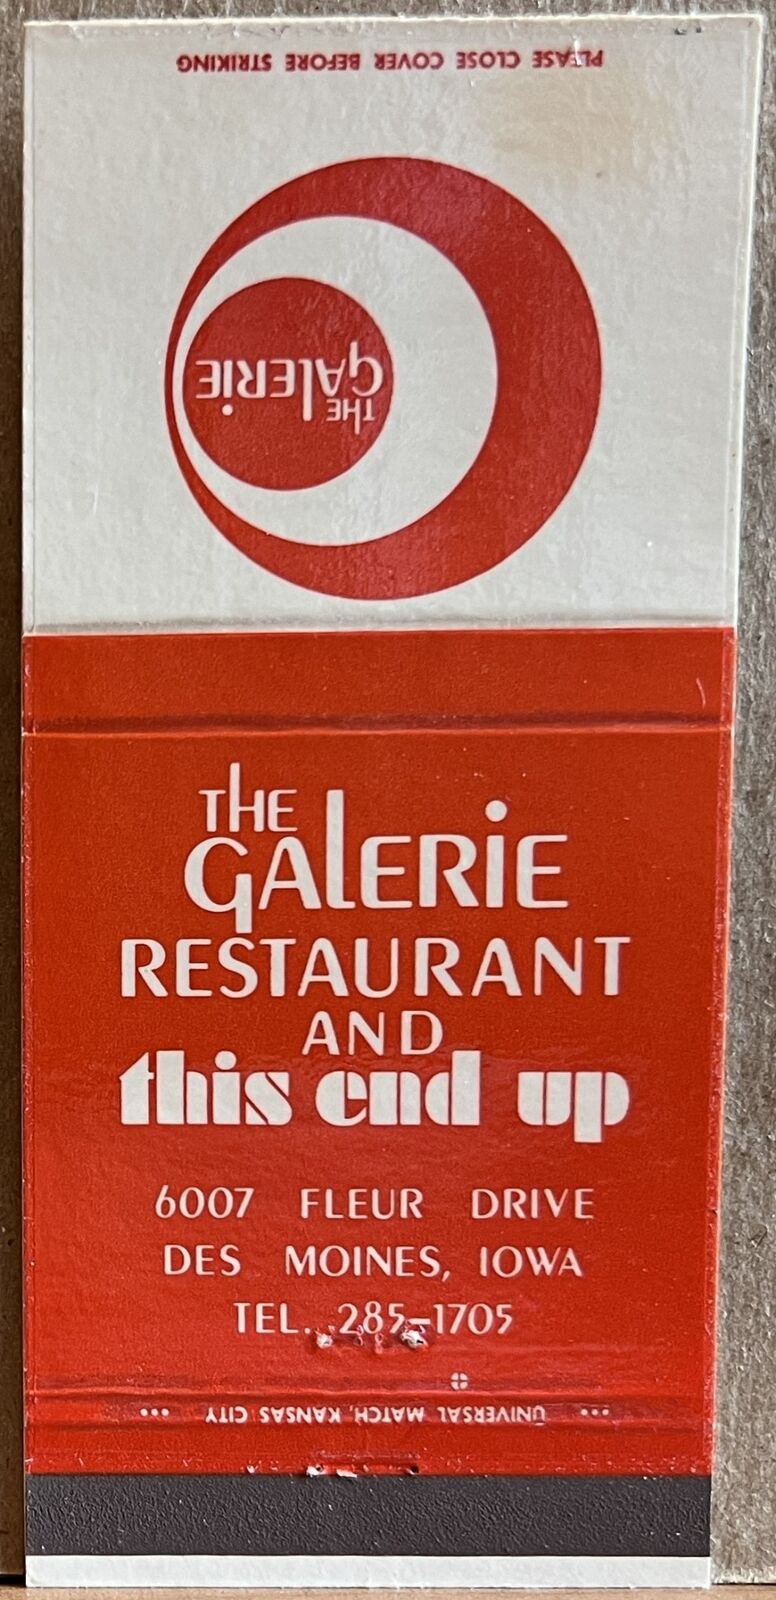 The Galerie Restaurant & This End Up Des Moines IA Iowa Vintage Matchbook Cover